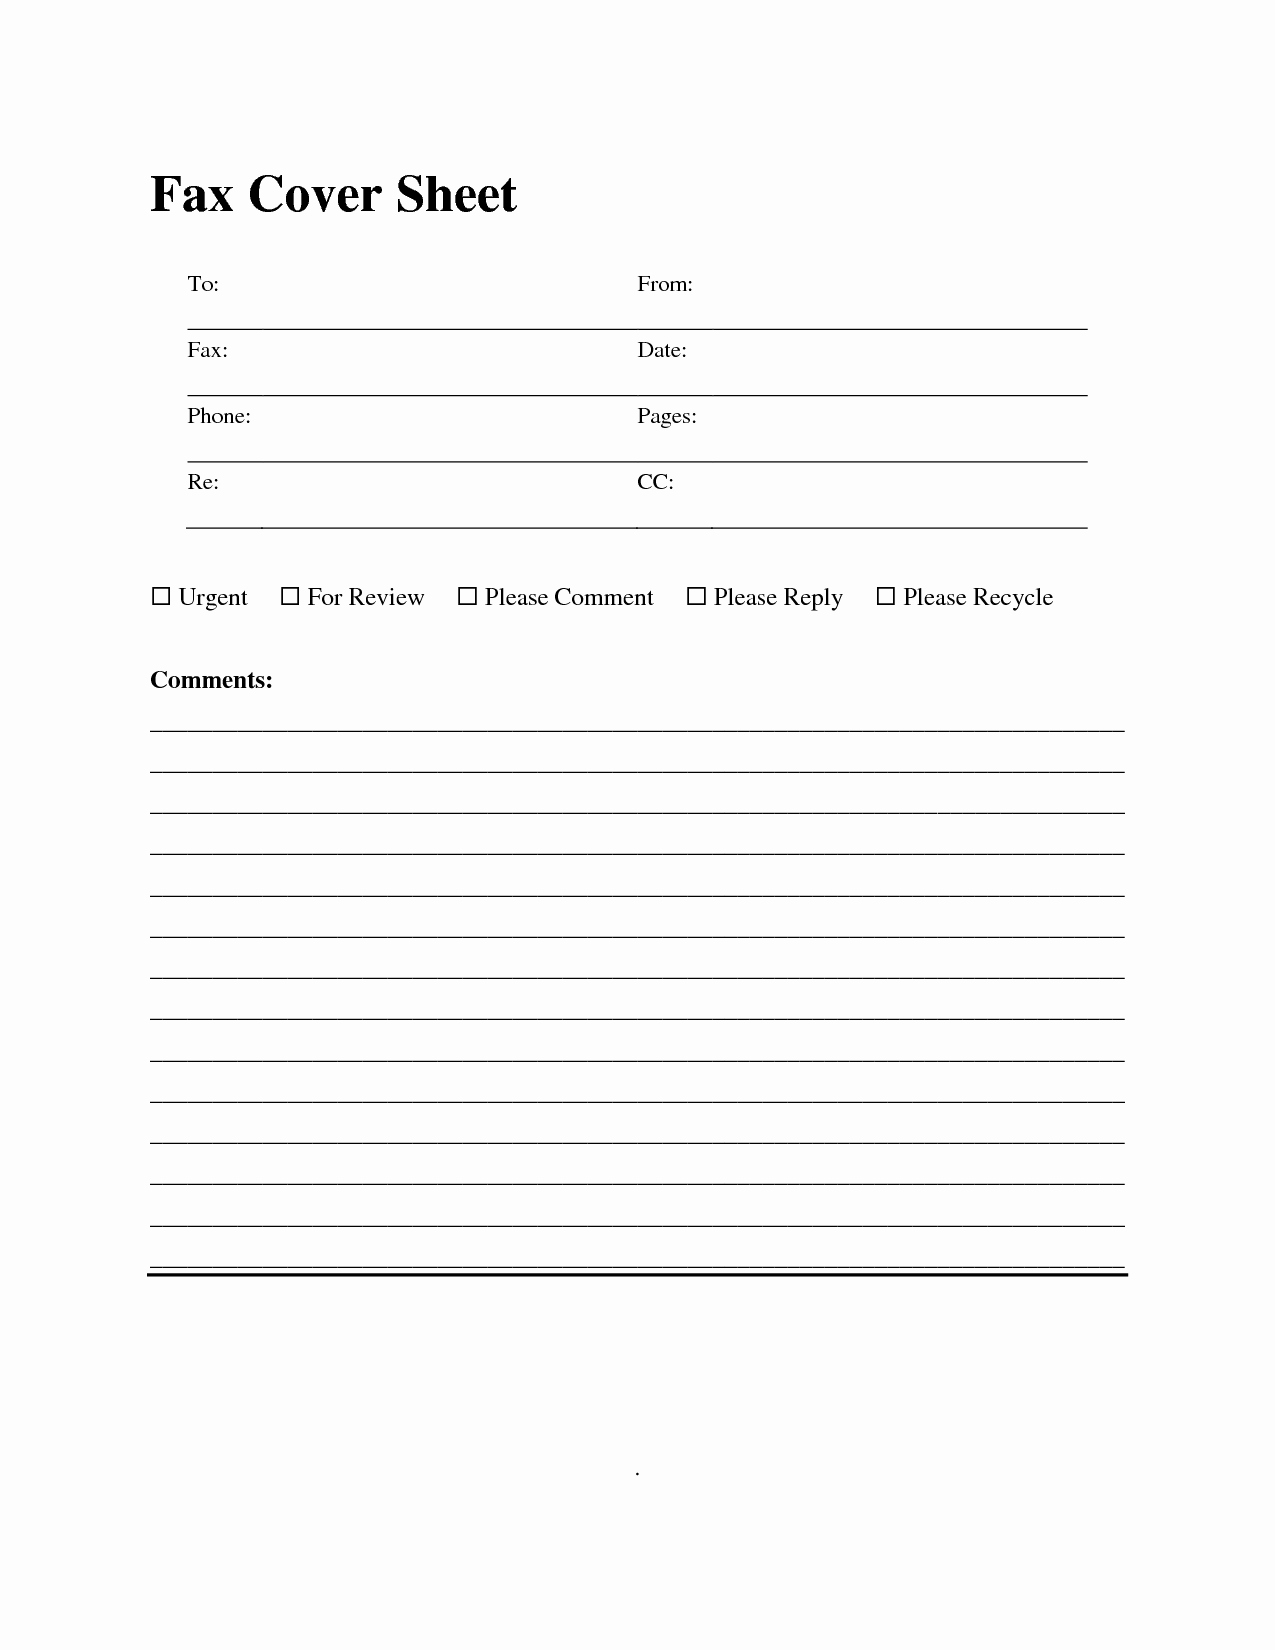 Cover Sheet for Fax Example Unique 10 Best Of Fax Cover Page Template Fax Cover